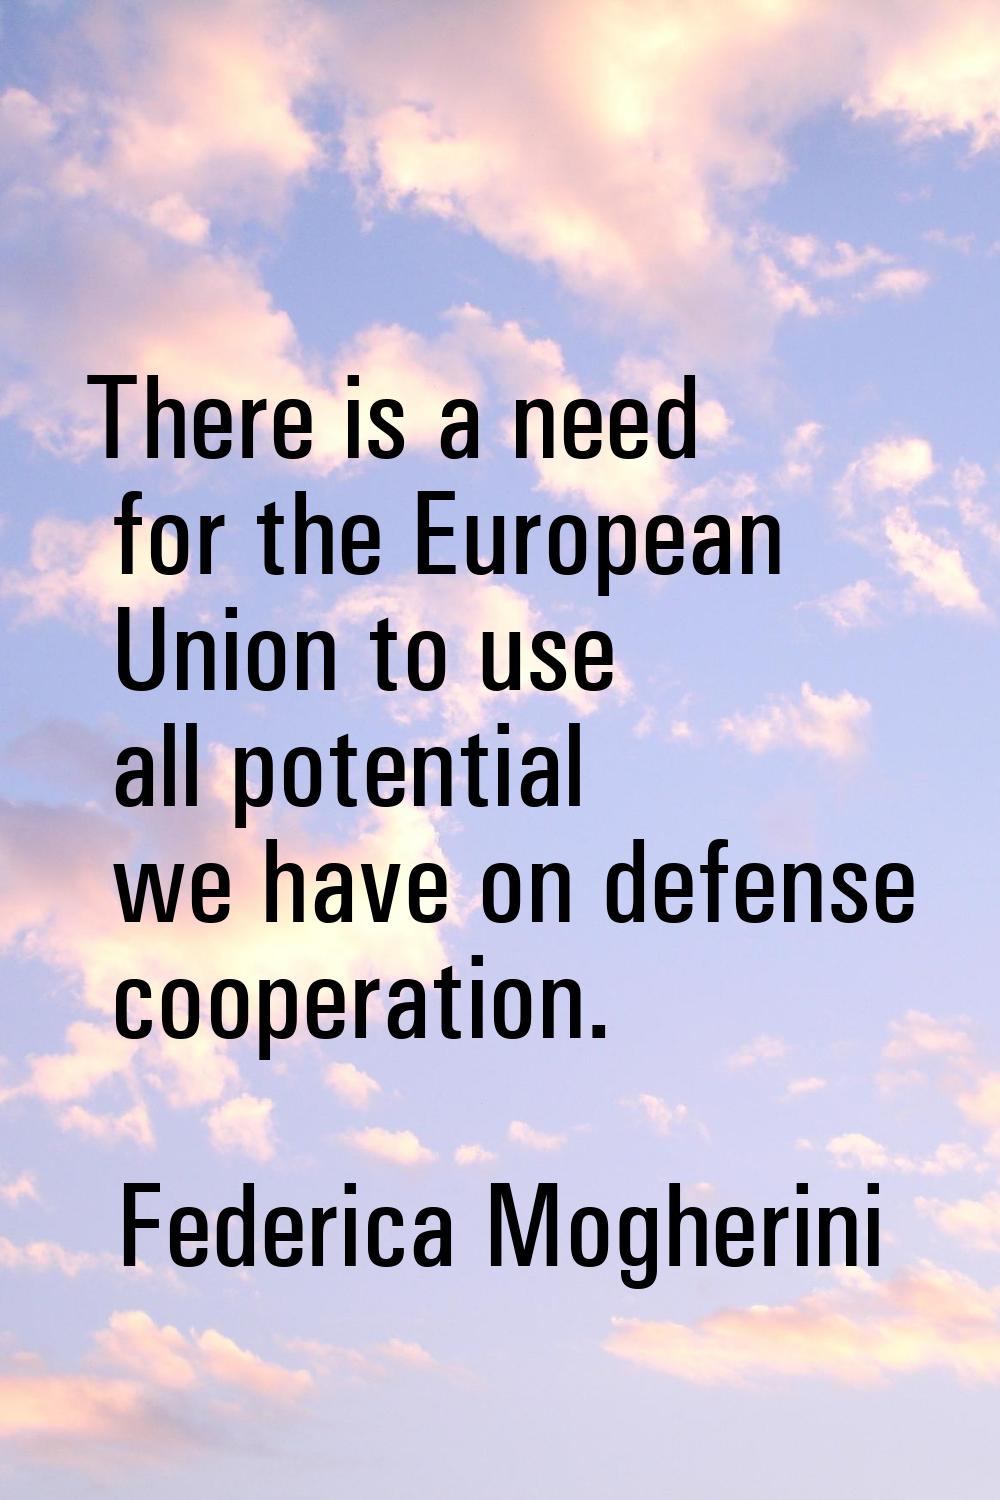 There is a need for the European Union to use all potential we have on defense cooperation.